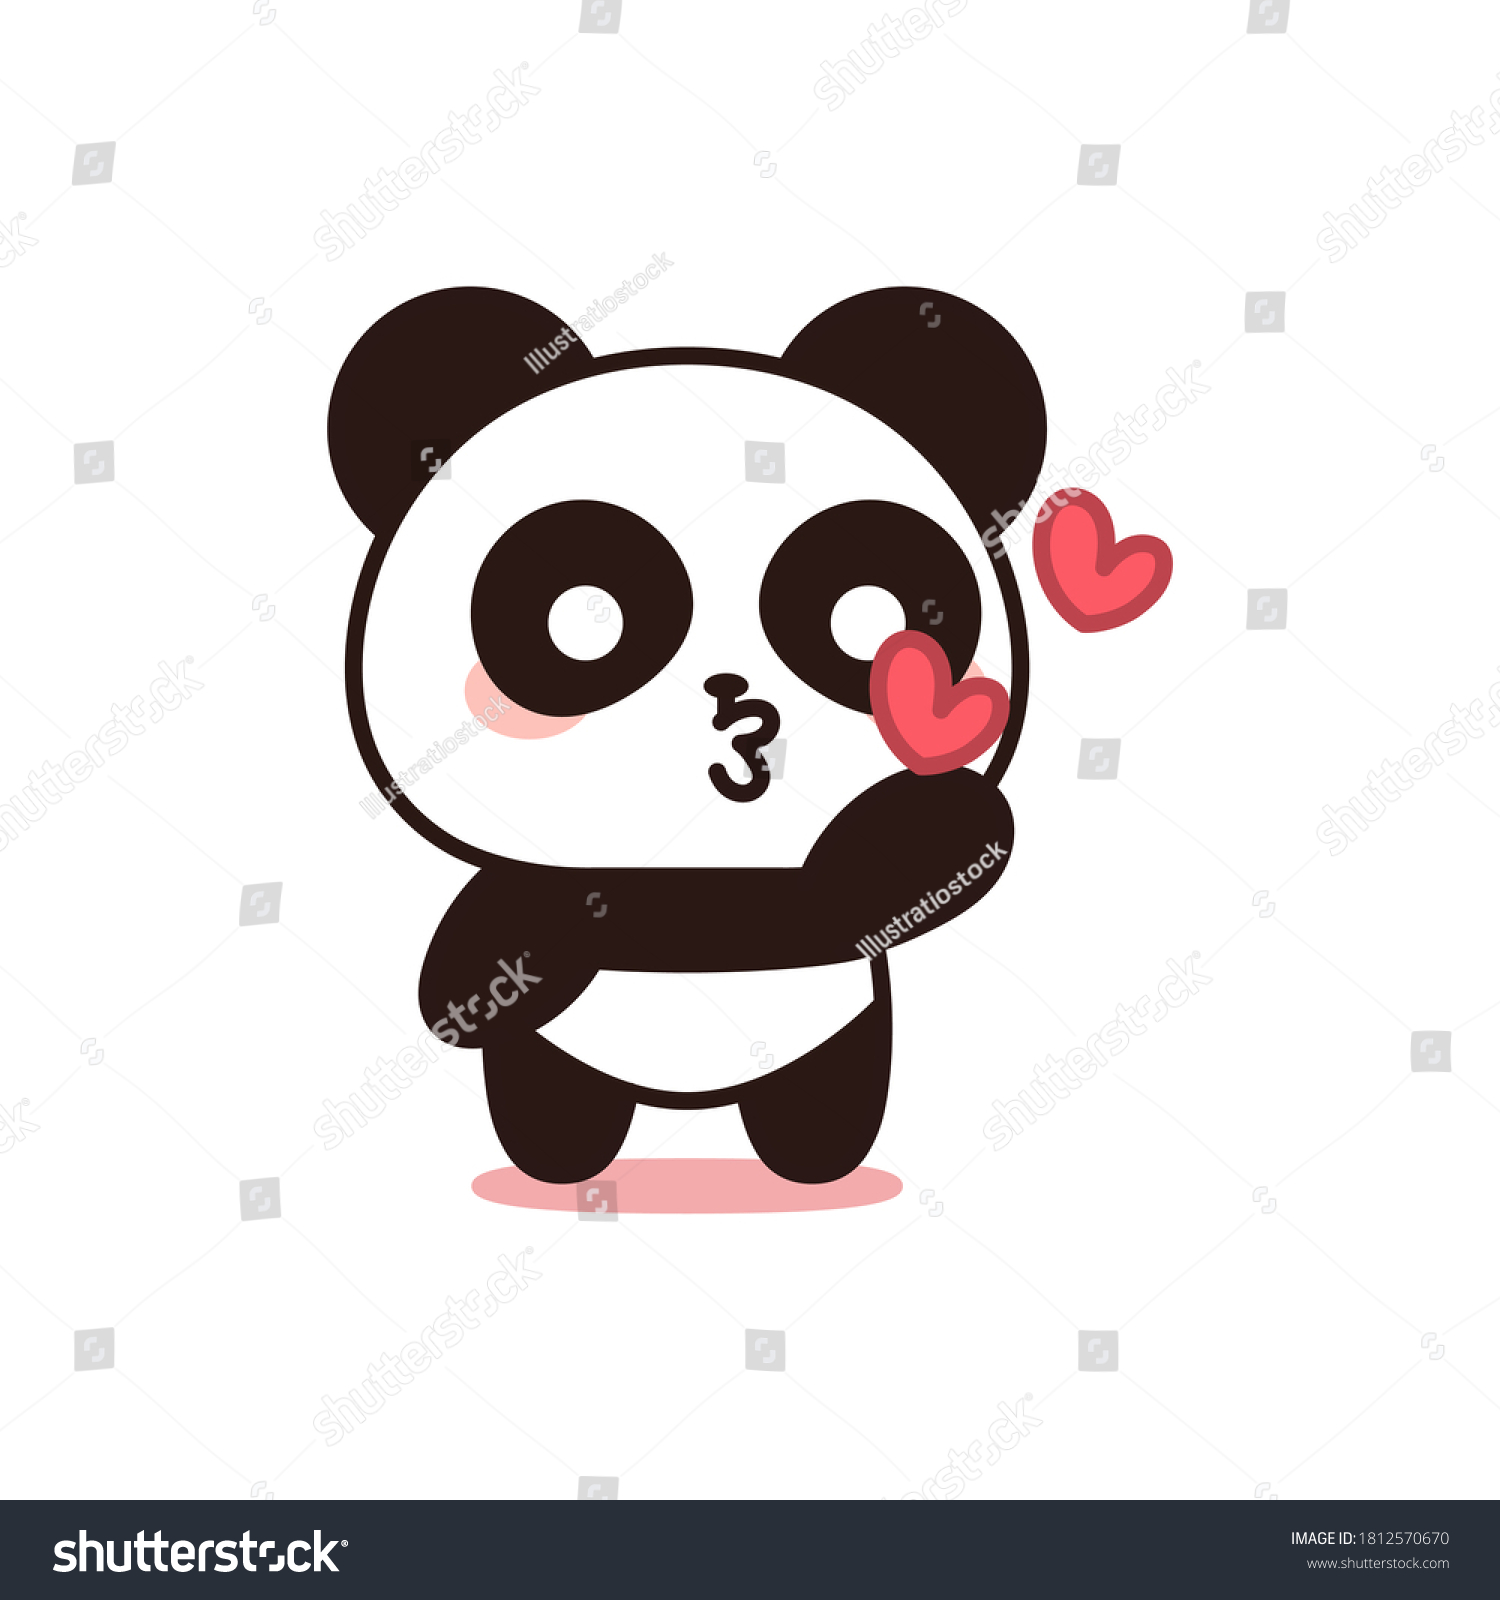 SVG of Isolated bear blowing kisses. Emoji of a bear - Vector svg